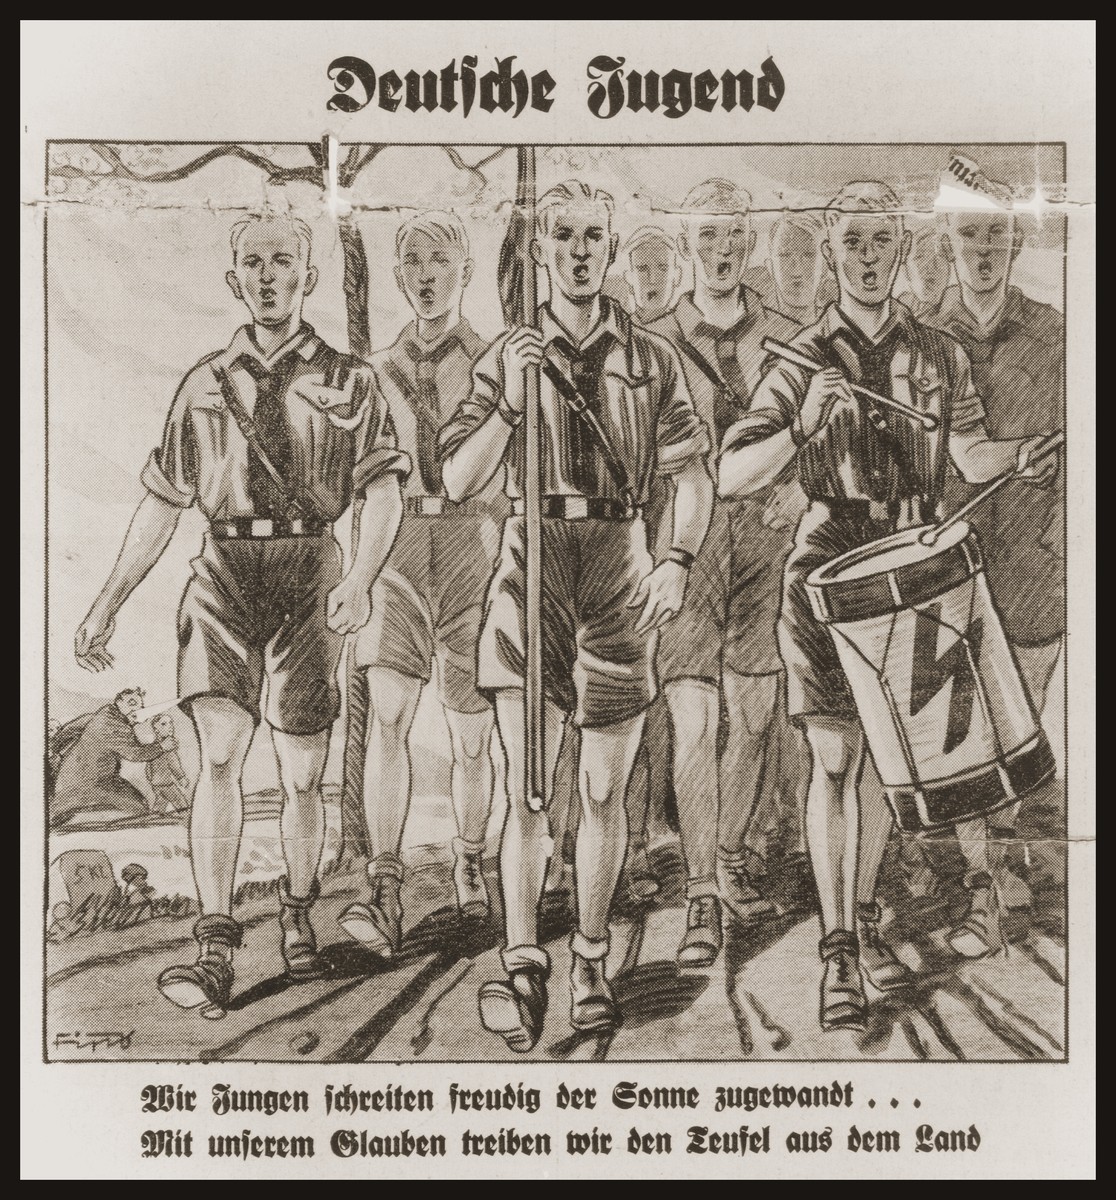 Cartoon on the front page of the Nazi publication, Der Stuermer, depicting a group of Hitler Youth marching forth to drive the forces of evil from the land.  The caption under the cartoon reads, "We youth step happily forward facing the sun... With our faith we drive the devil from the land."